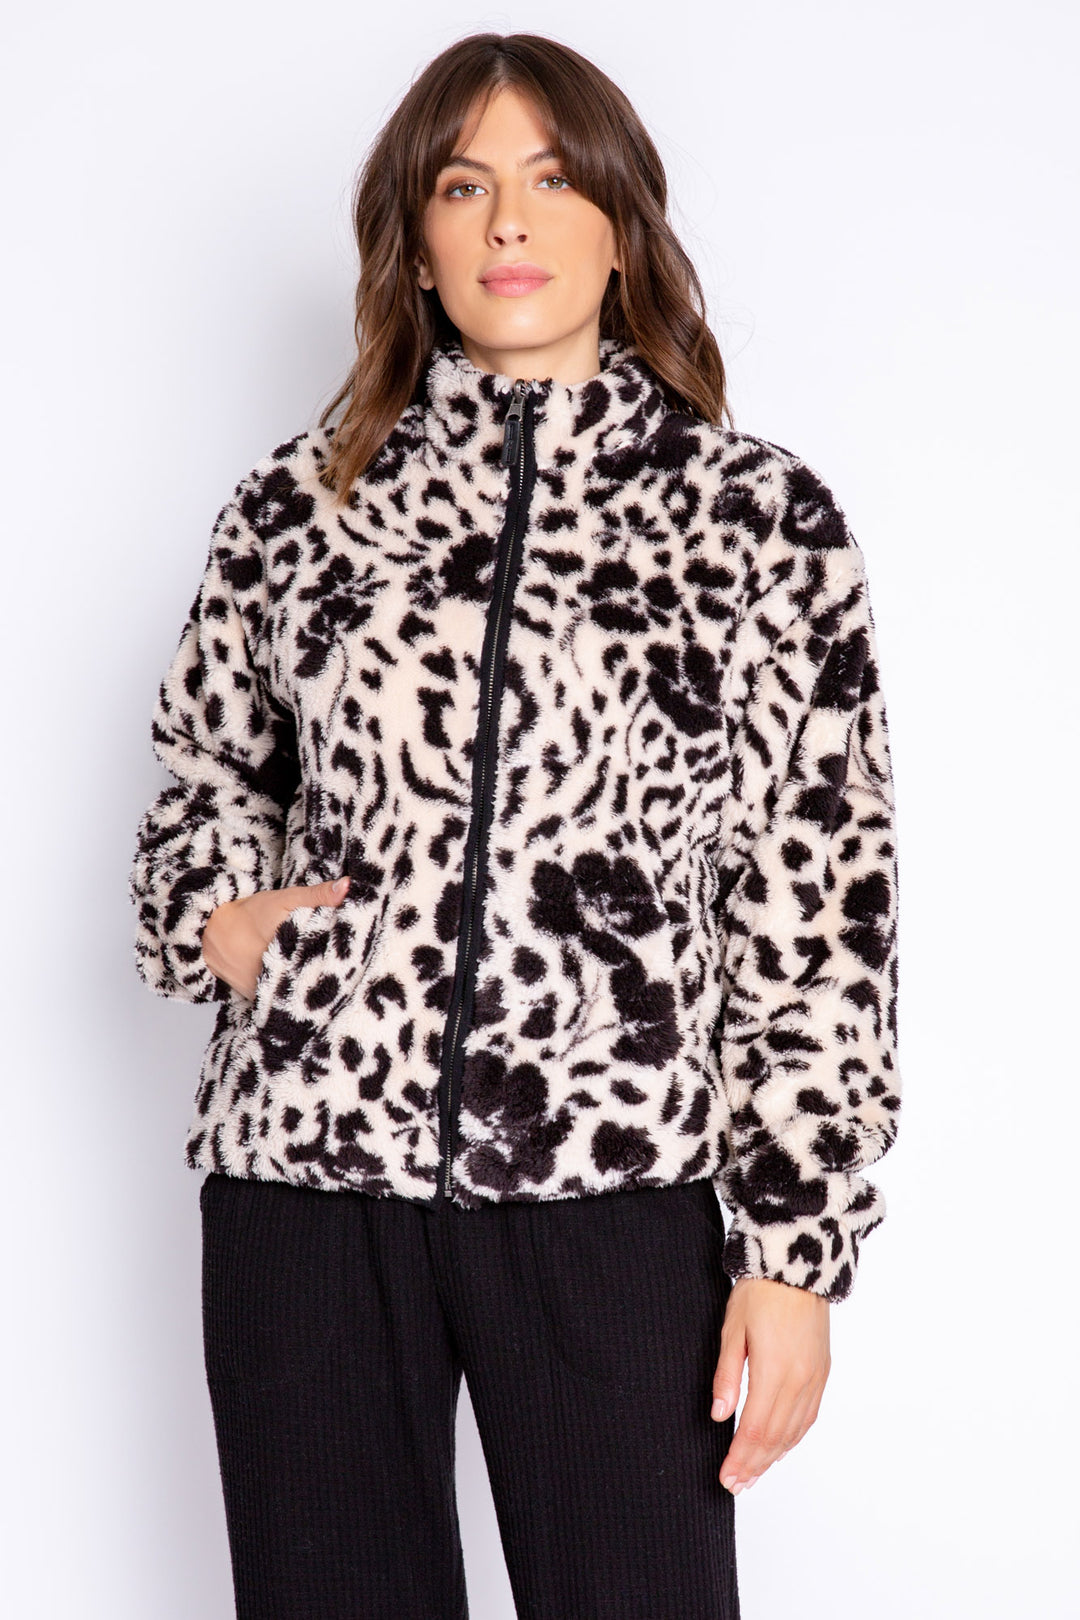 Plush zip-up jacket in tan with allover black floral-animal print. Has elastic cuffs & pockets. (6889072328804)